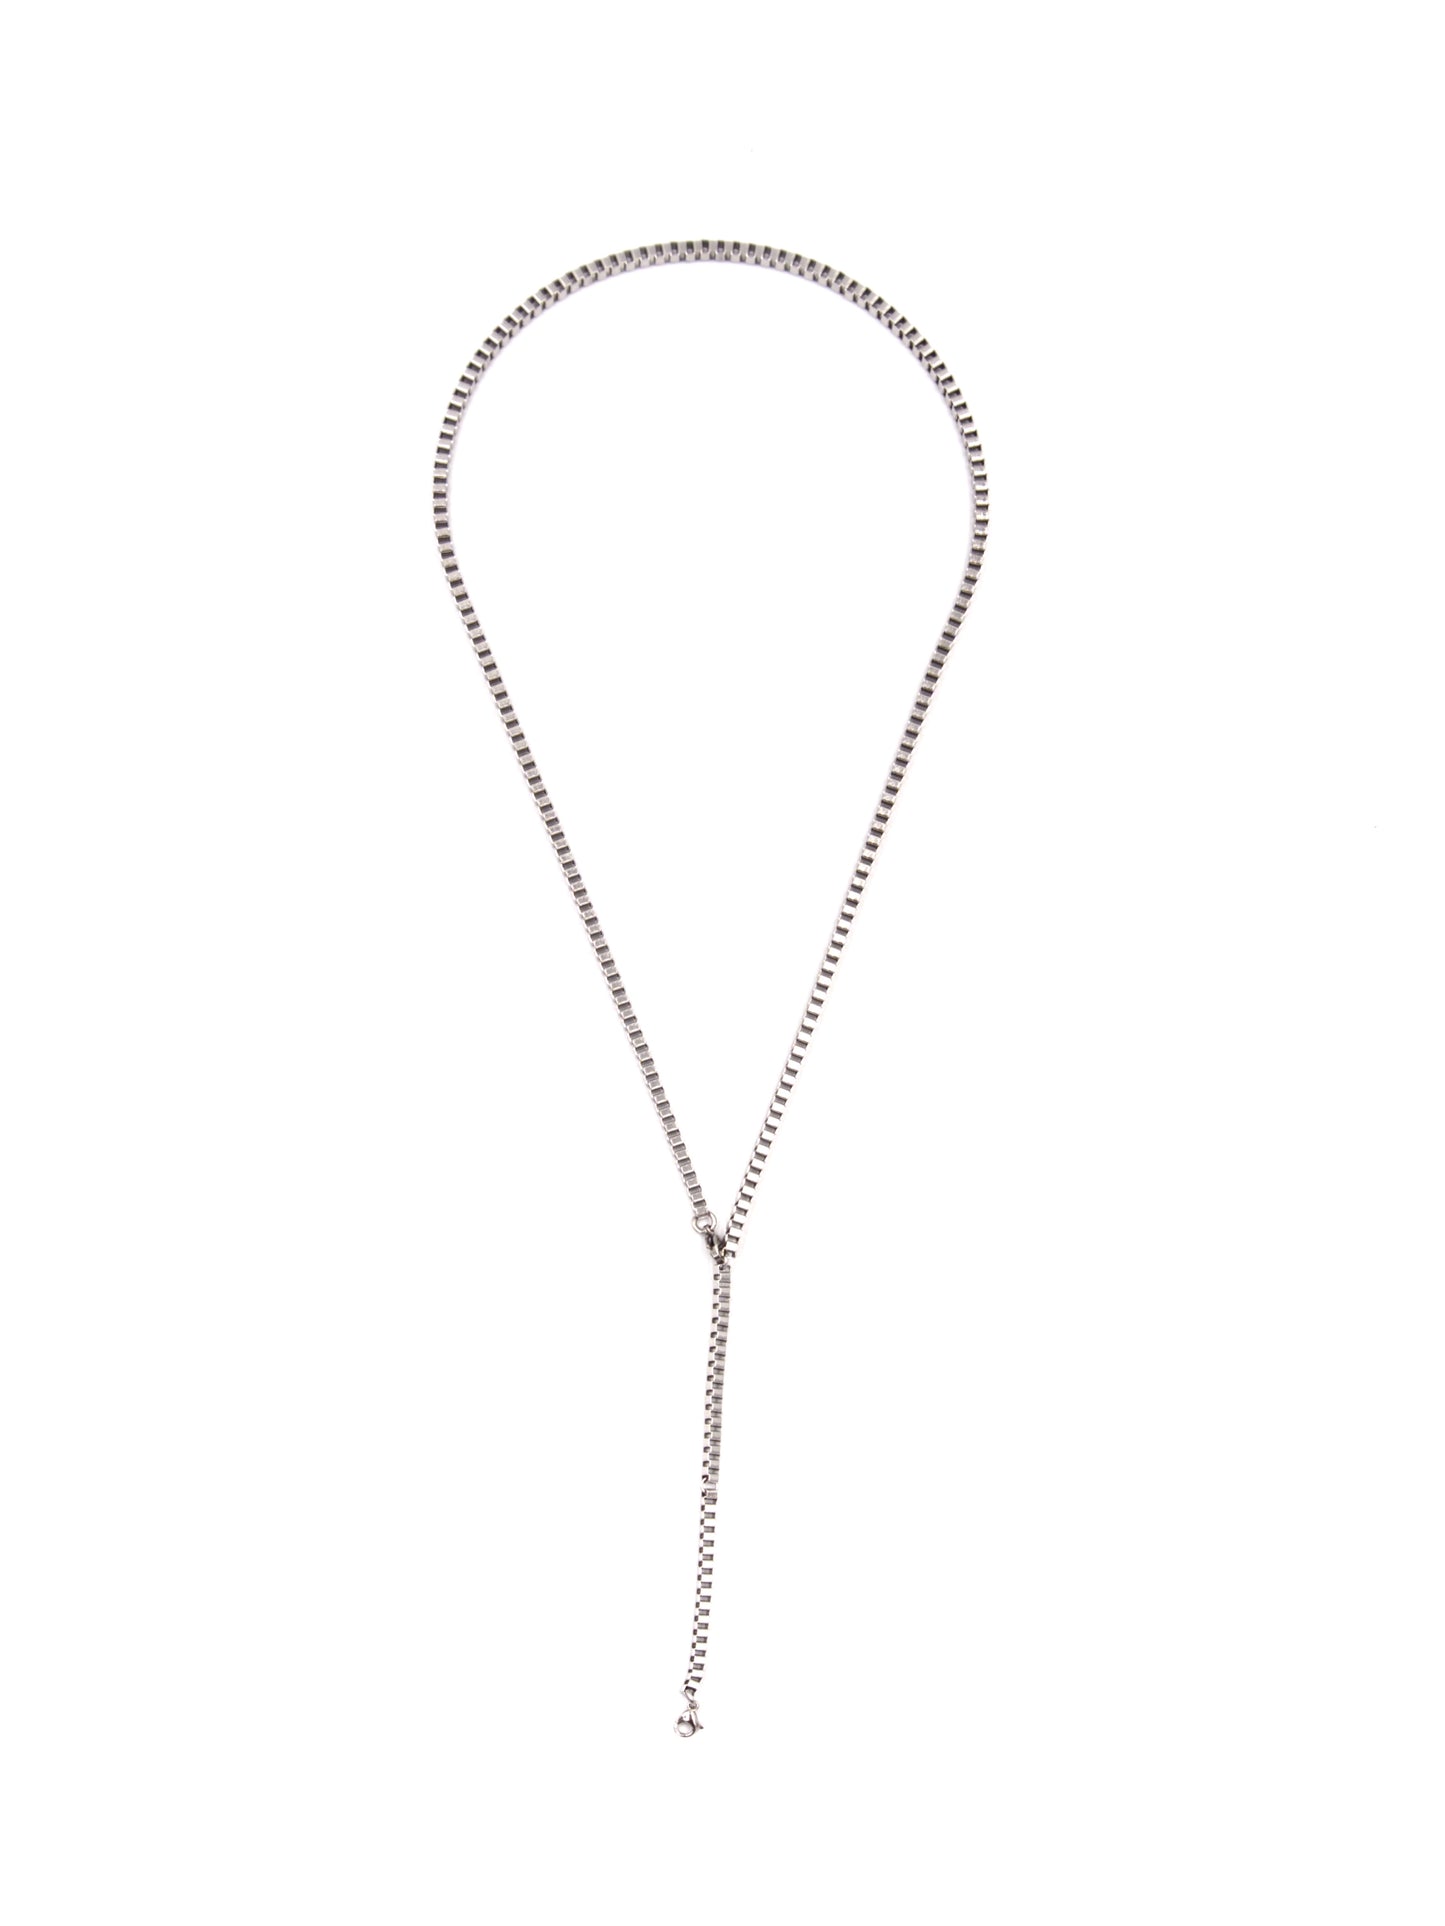 Basic 3mm Square Chain Necklace